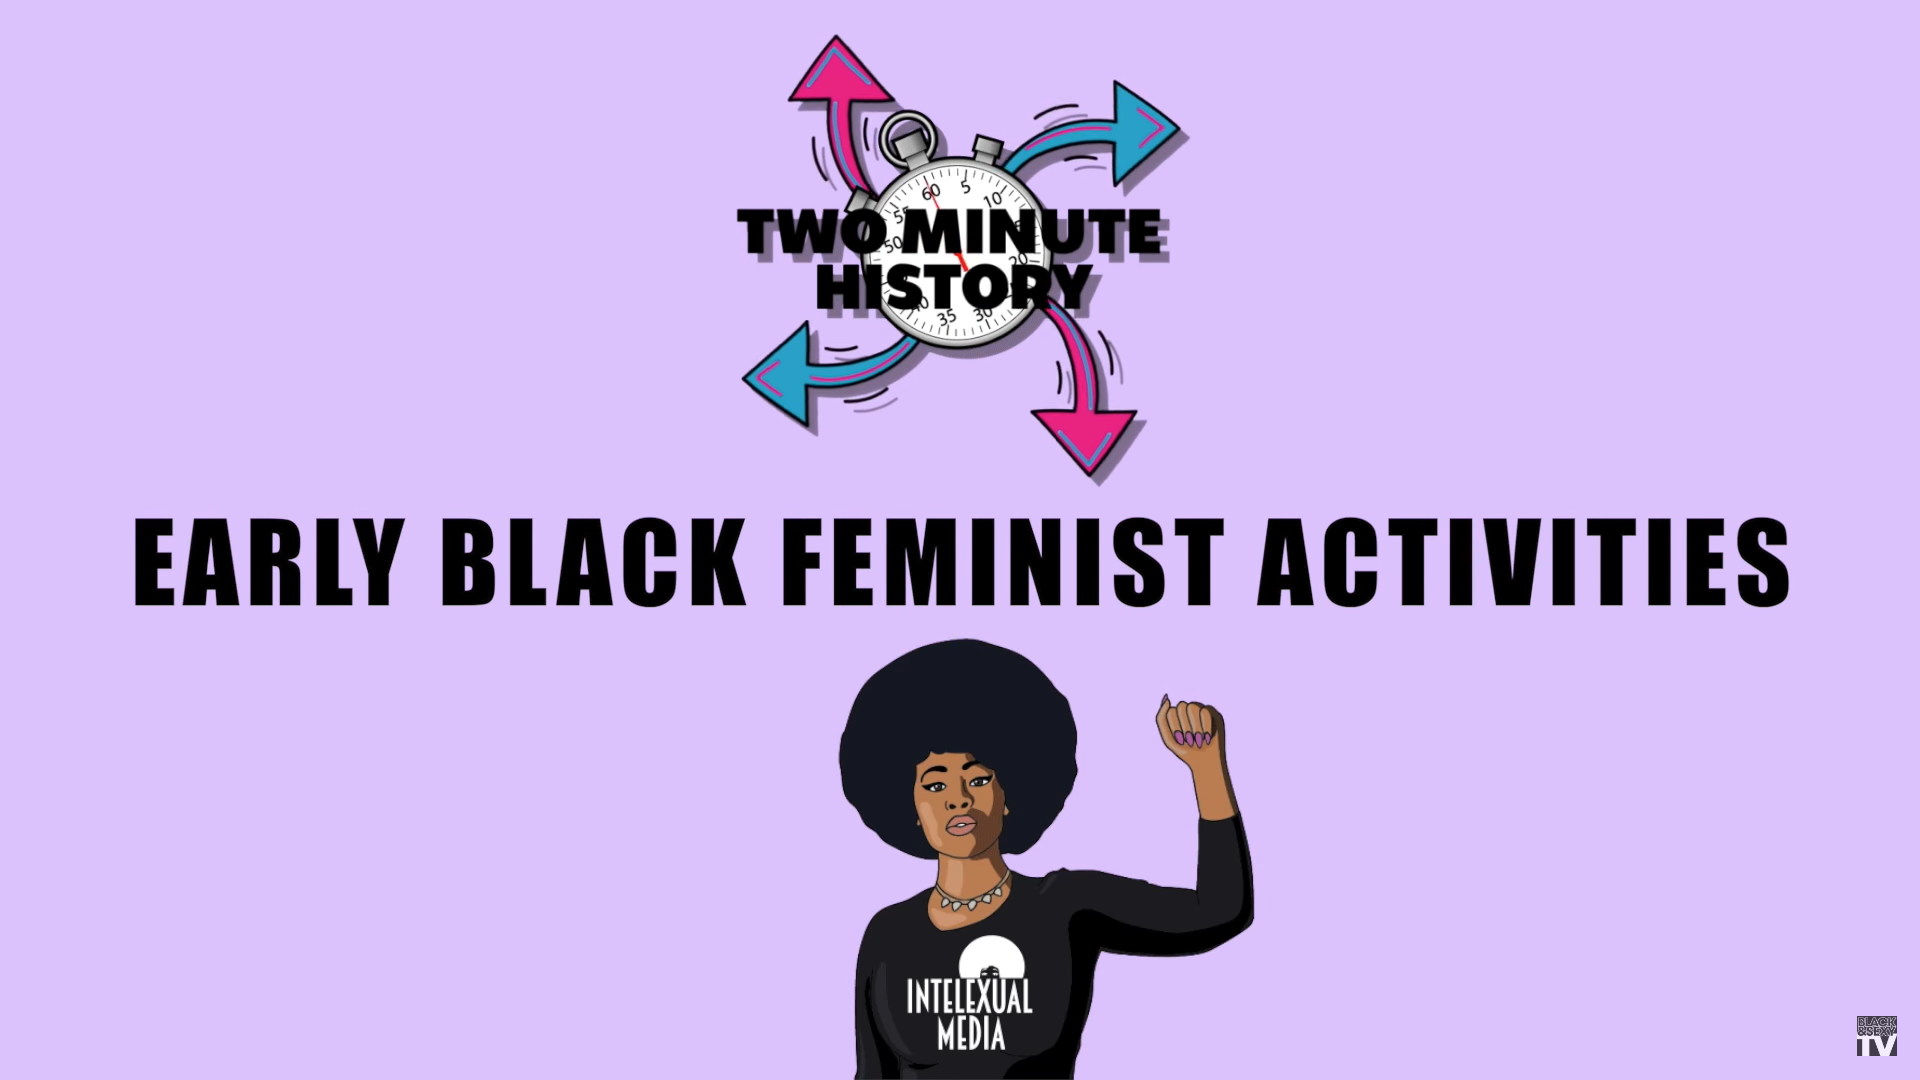 Two Minute History: Early Black Feminist Activities